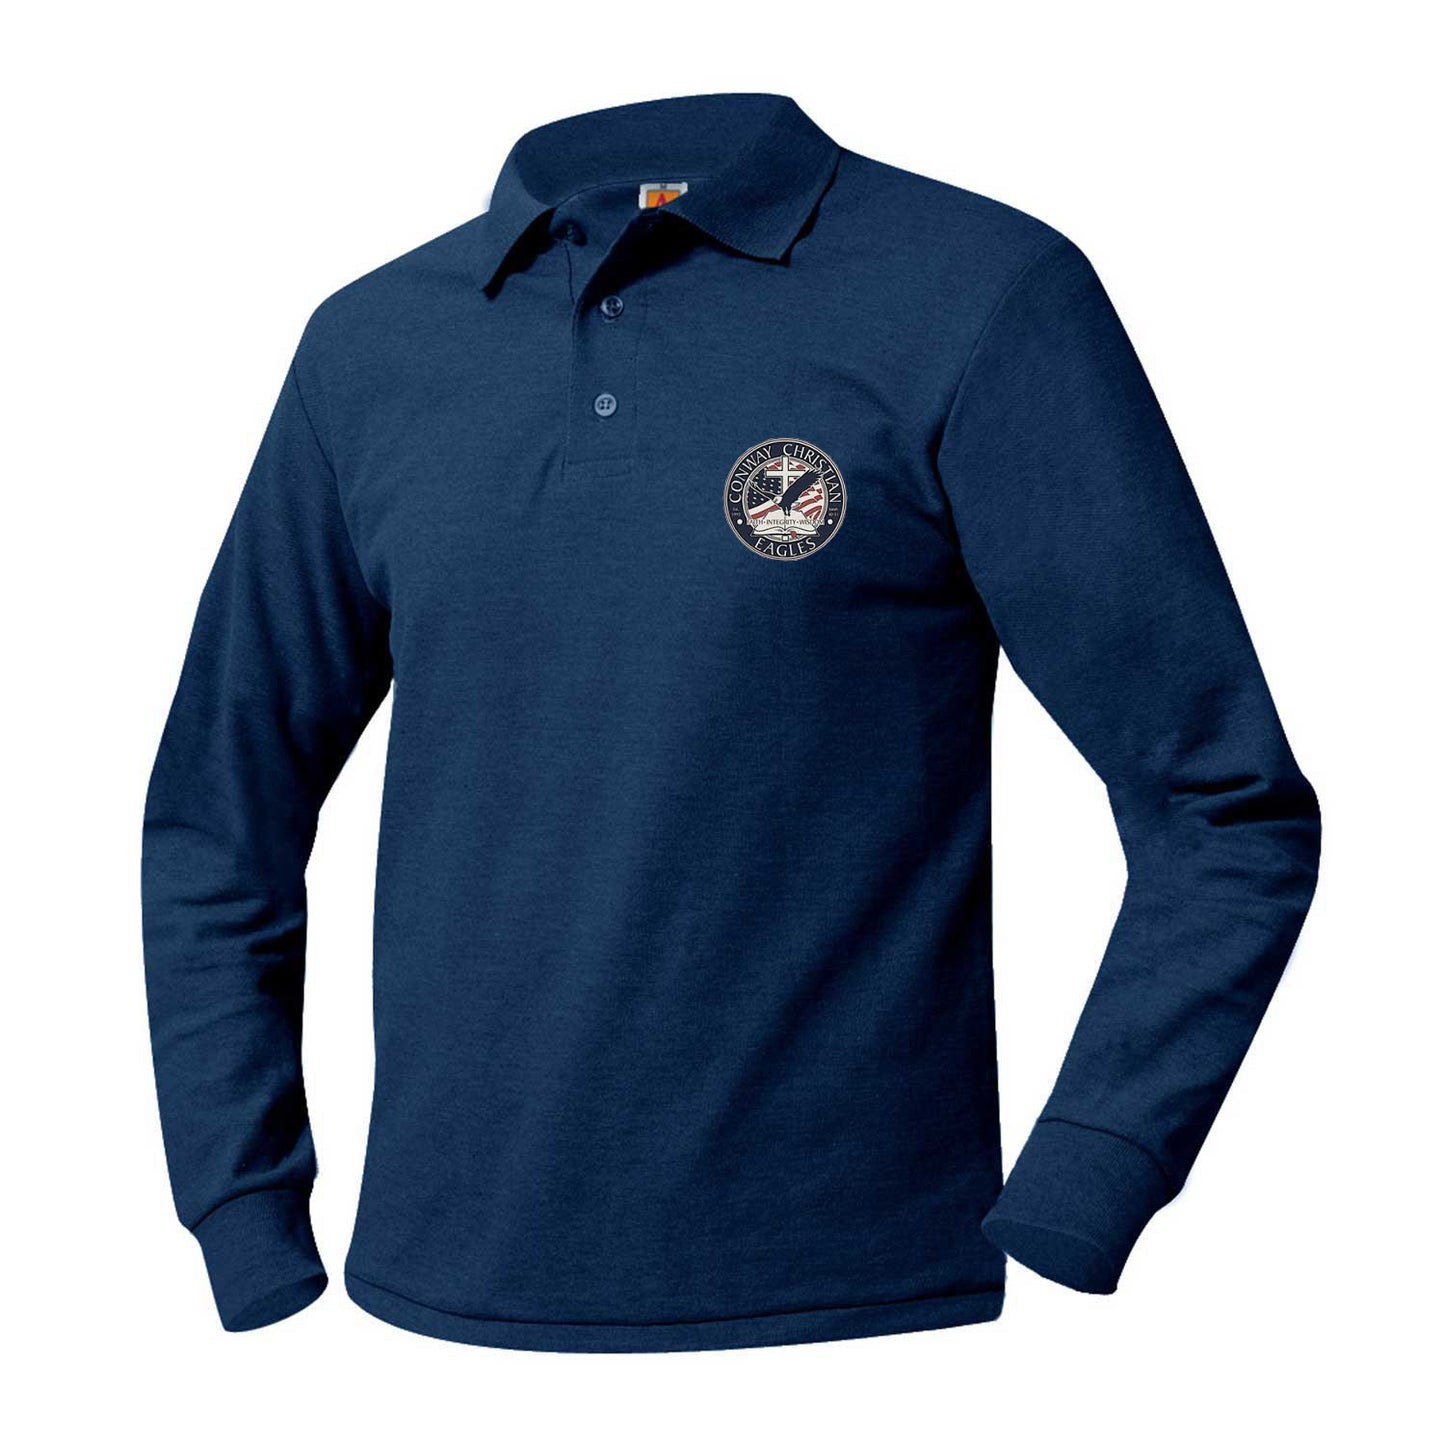 Youth Long Sleeve Smooth Polo With Conway Christian School Logo